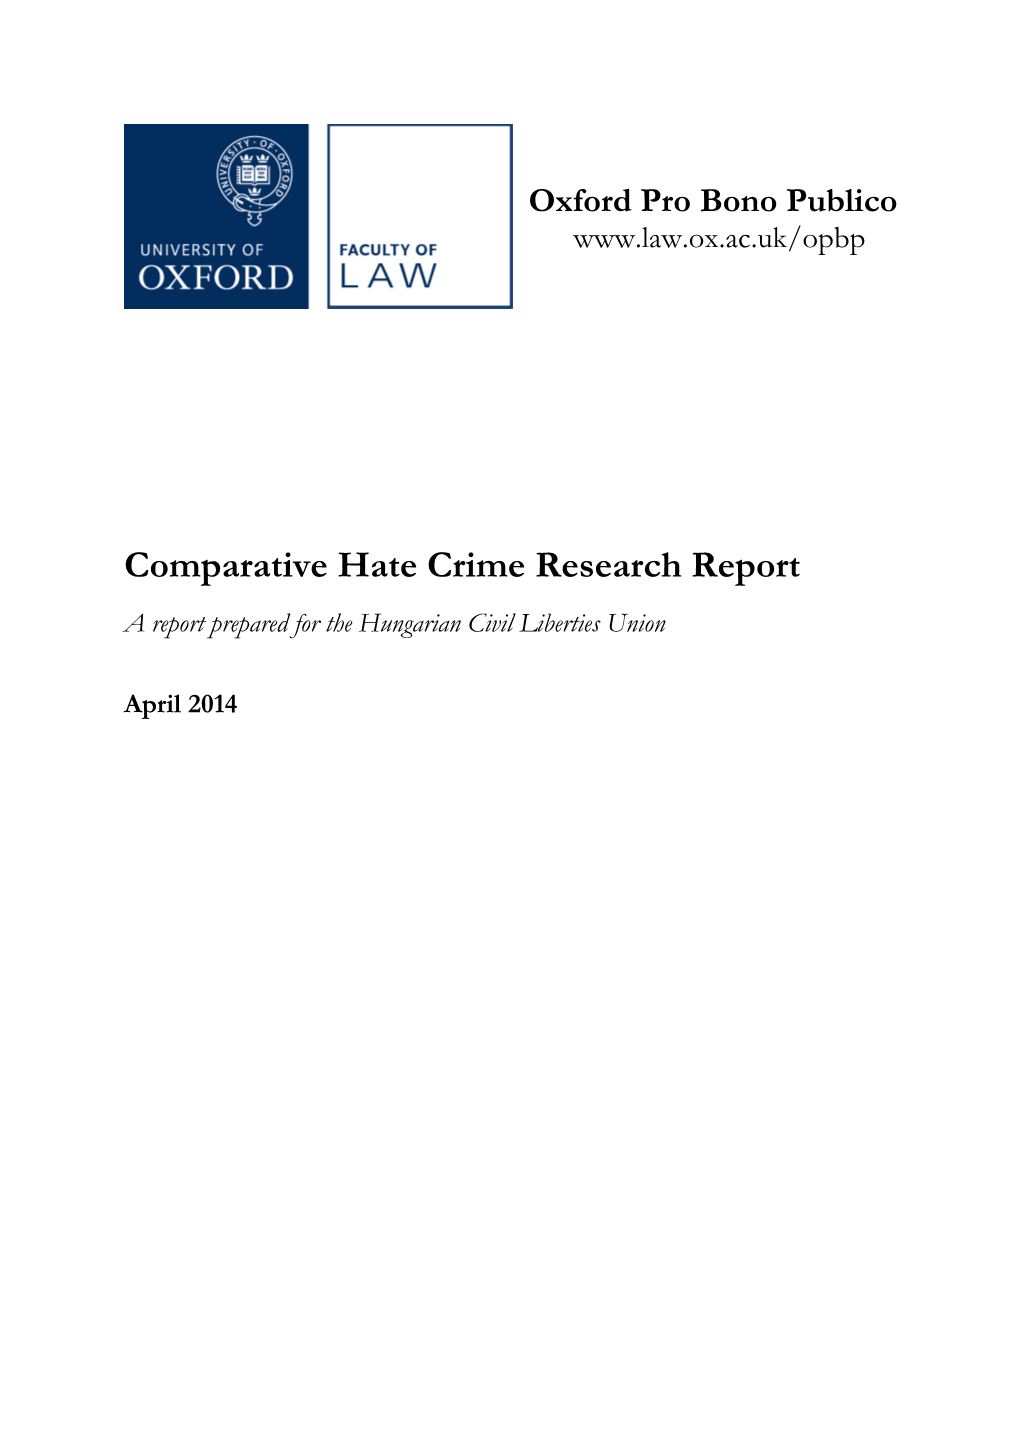 Comparative Hate Crime Research Report a Report Prepared for the Hungarian Civil Liberties Union